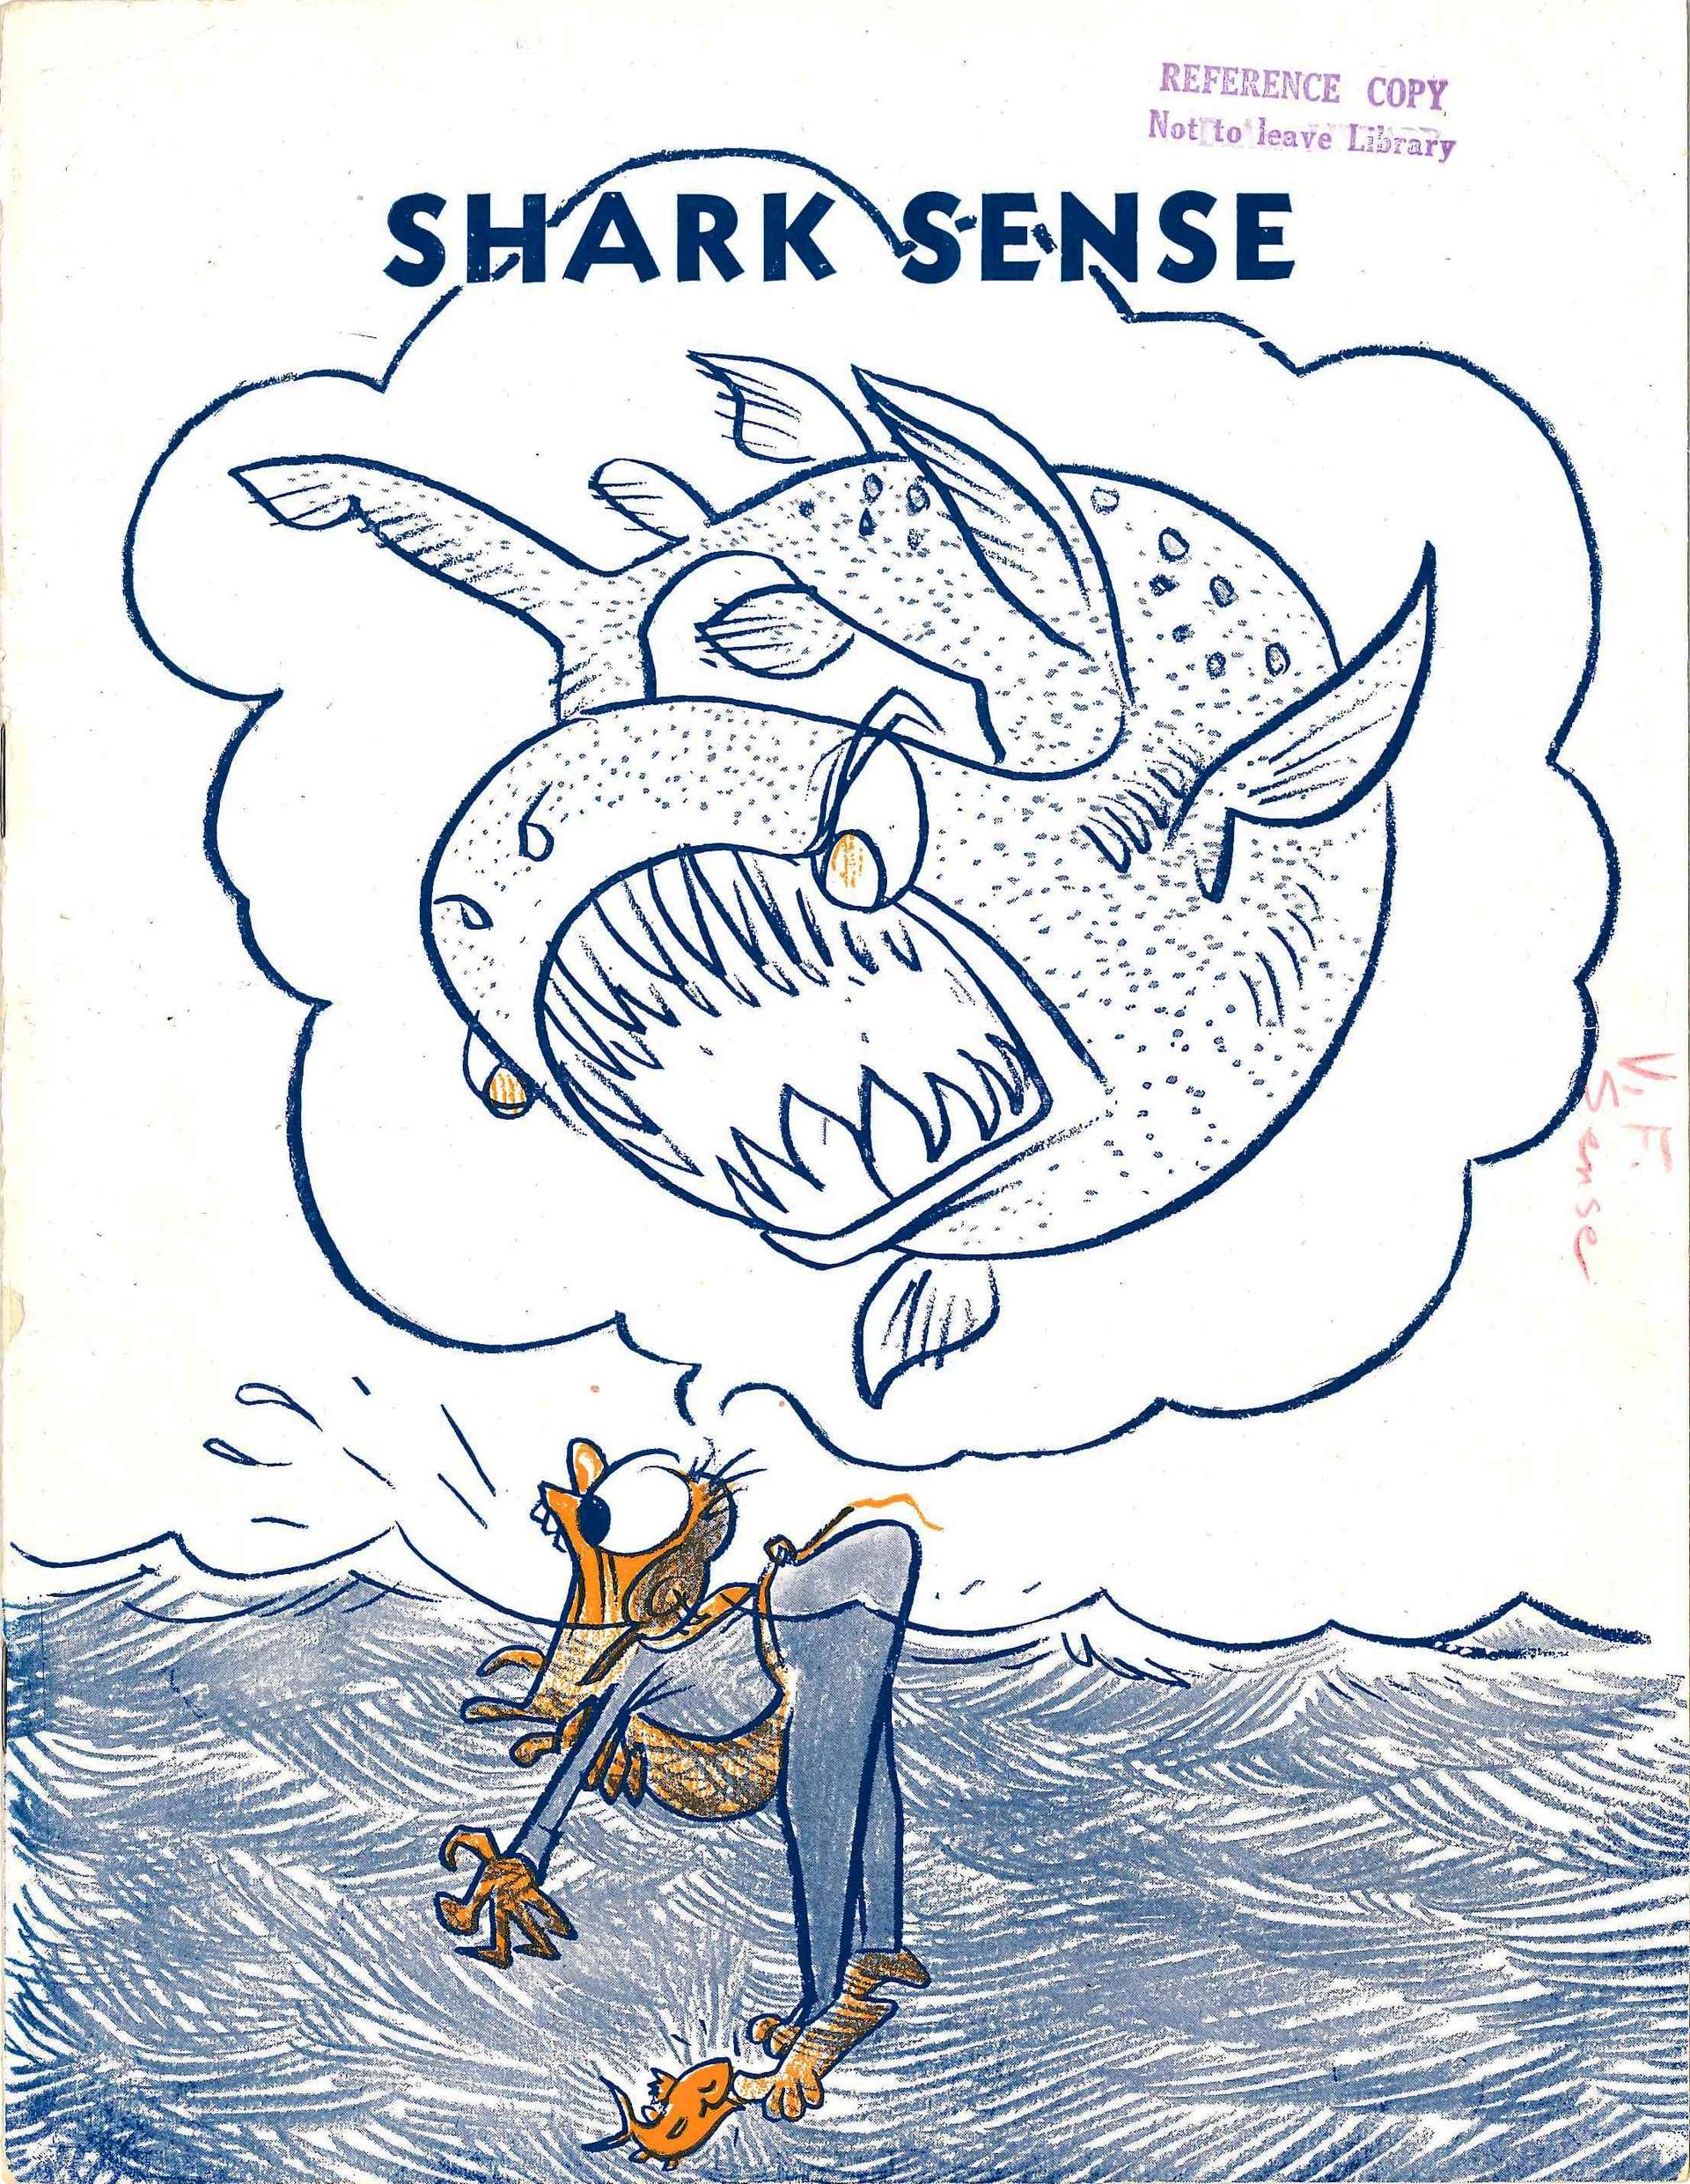 ‘Shark Sense’ sought to prepare troops for encounters with the marine predators.